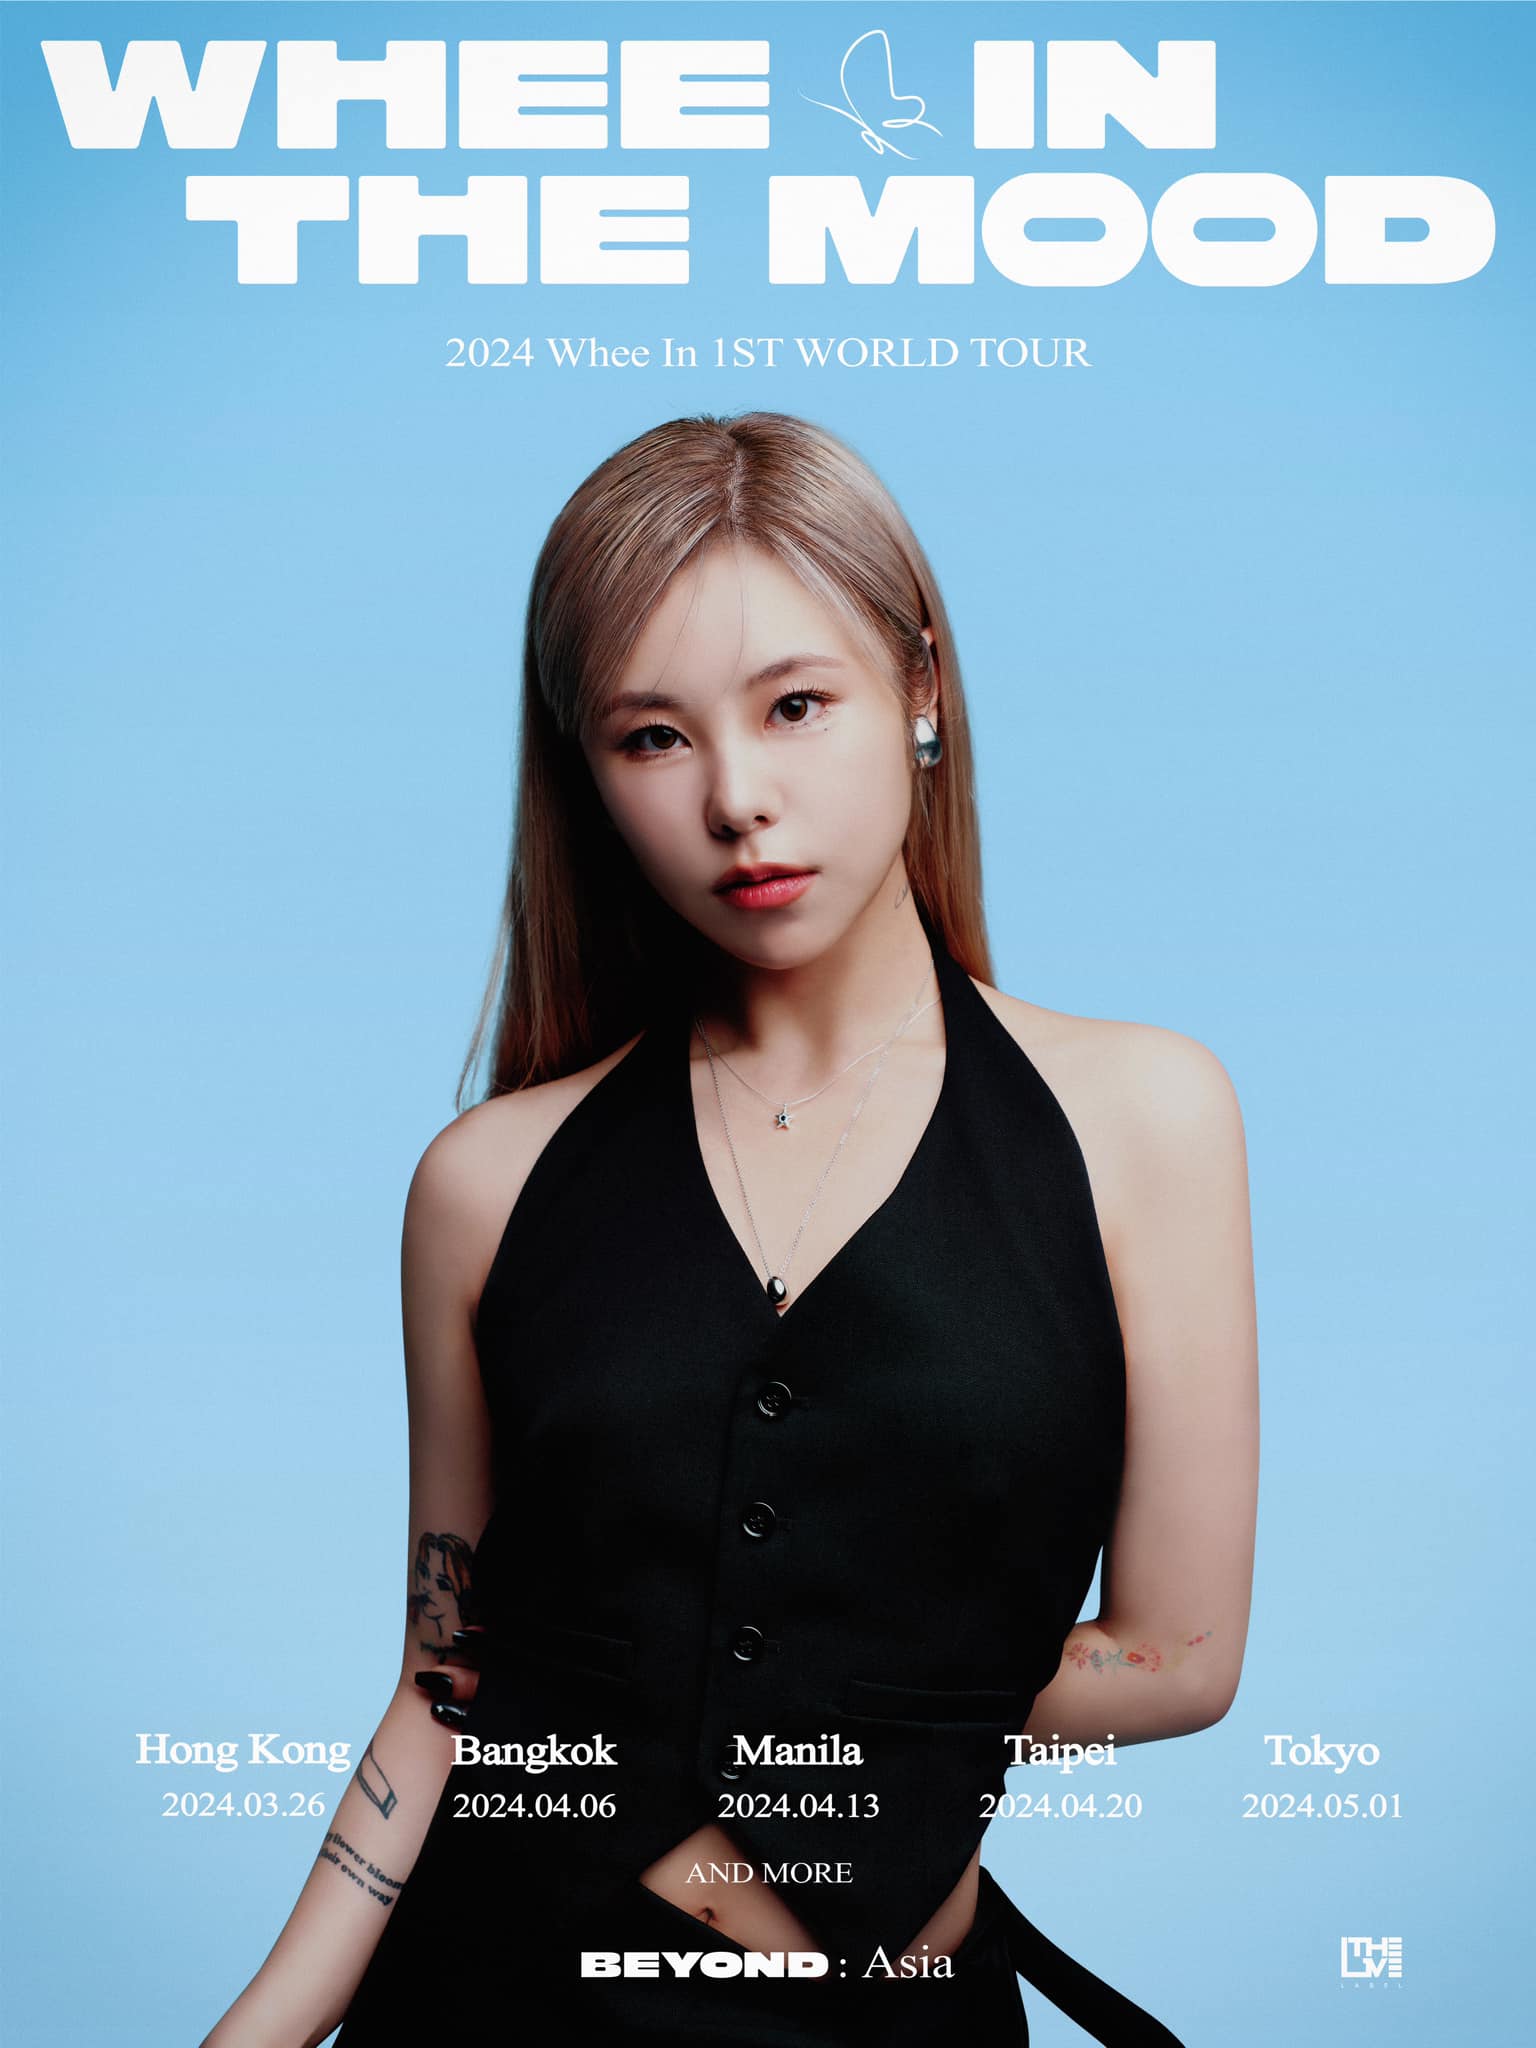 2024 Whee In 1ST WORLD TOUR WHEE IN THE MOOD [BEYOND]